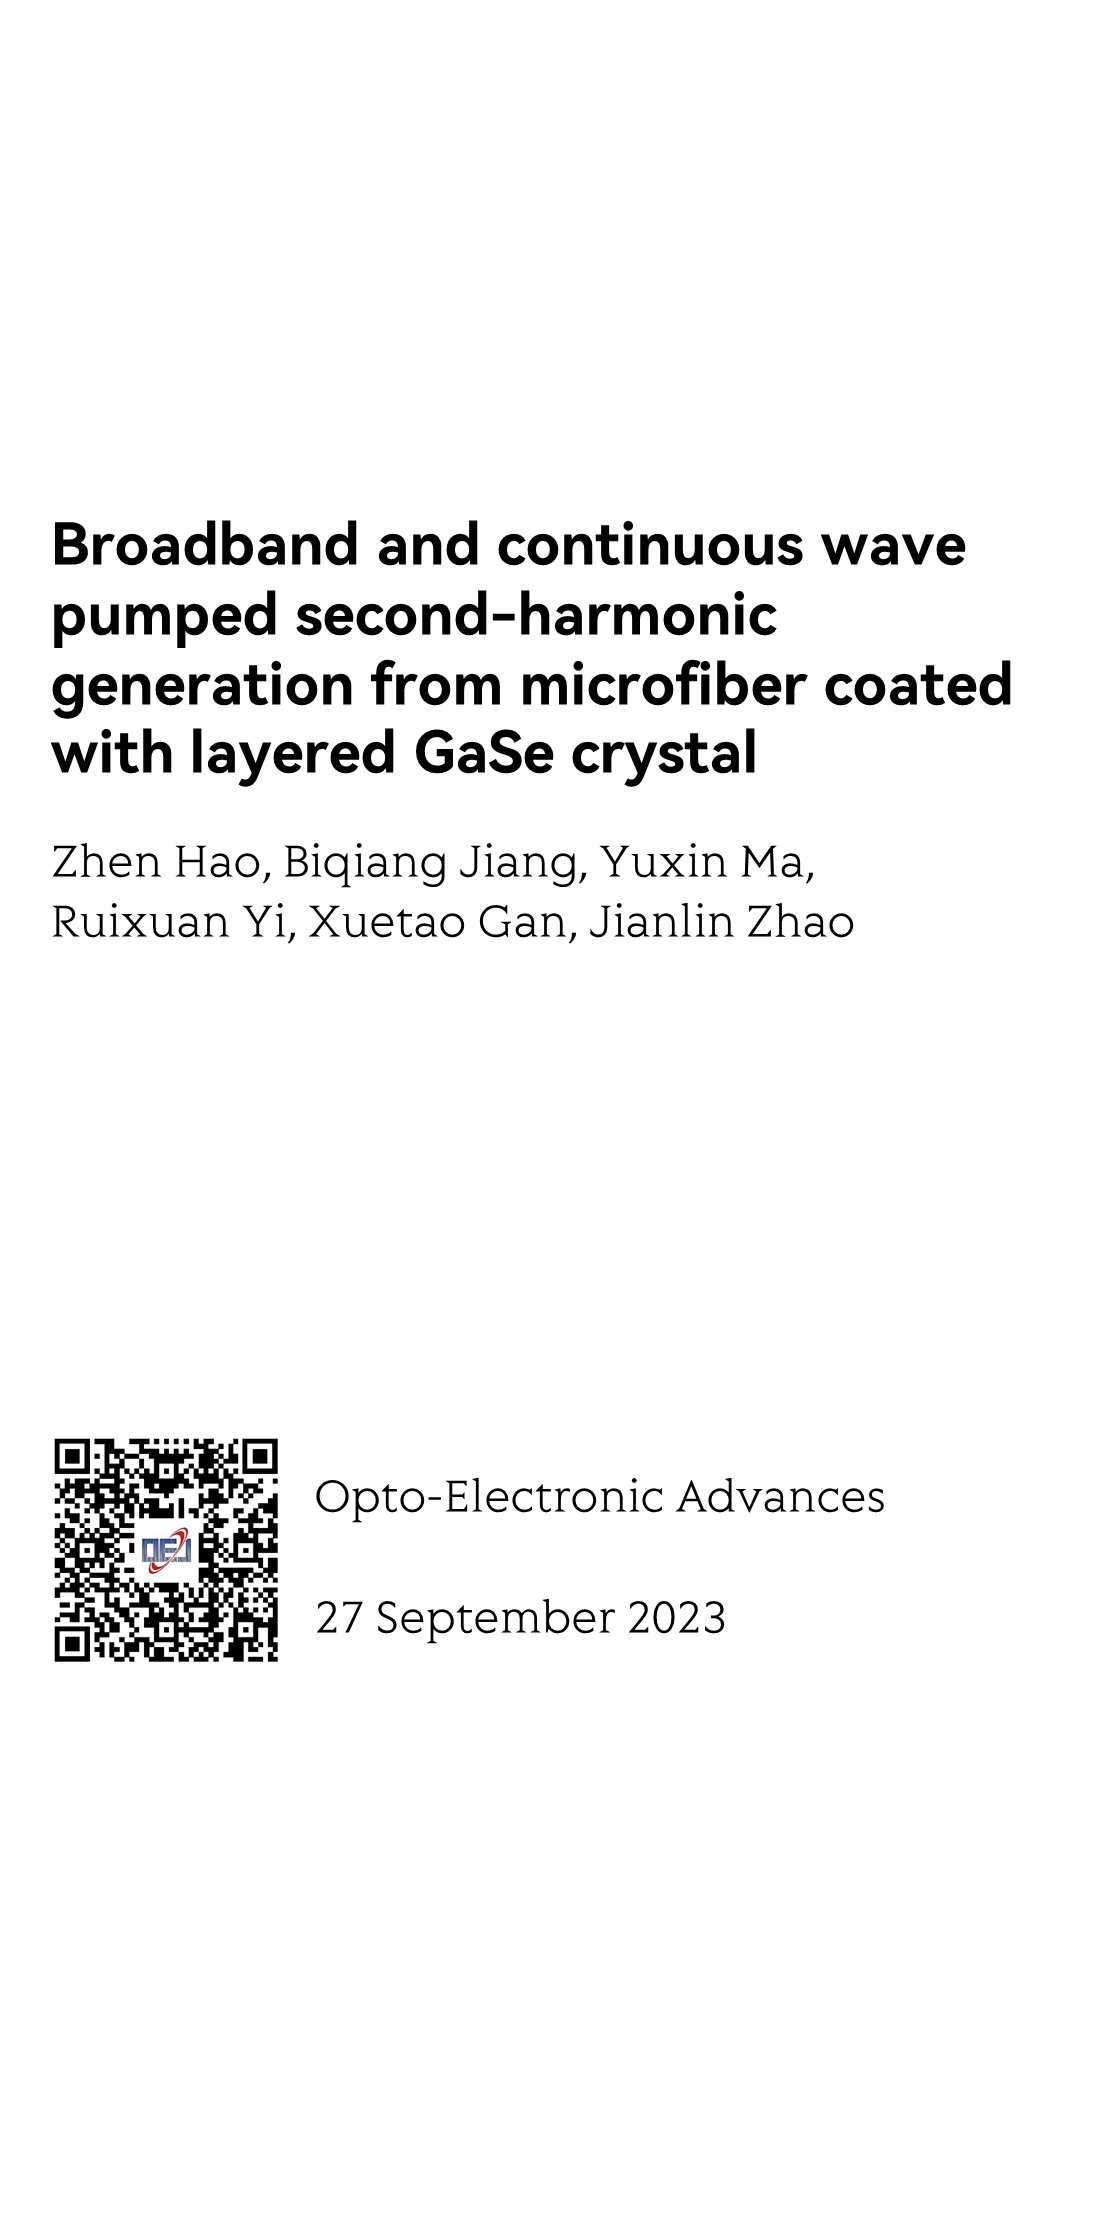 Broadband and continuous wave pumped second-harmonic generation from microfiber coated with layered GaSe crystal_1